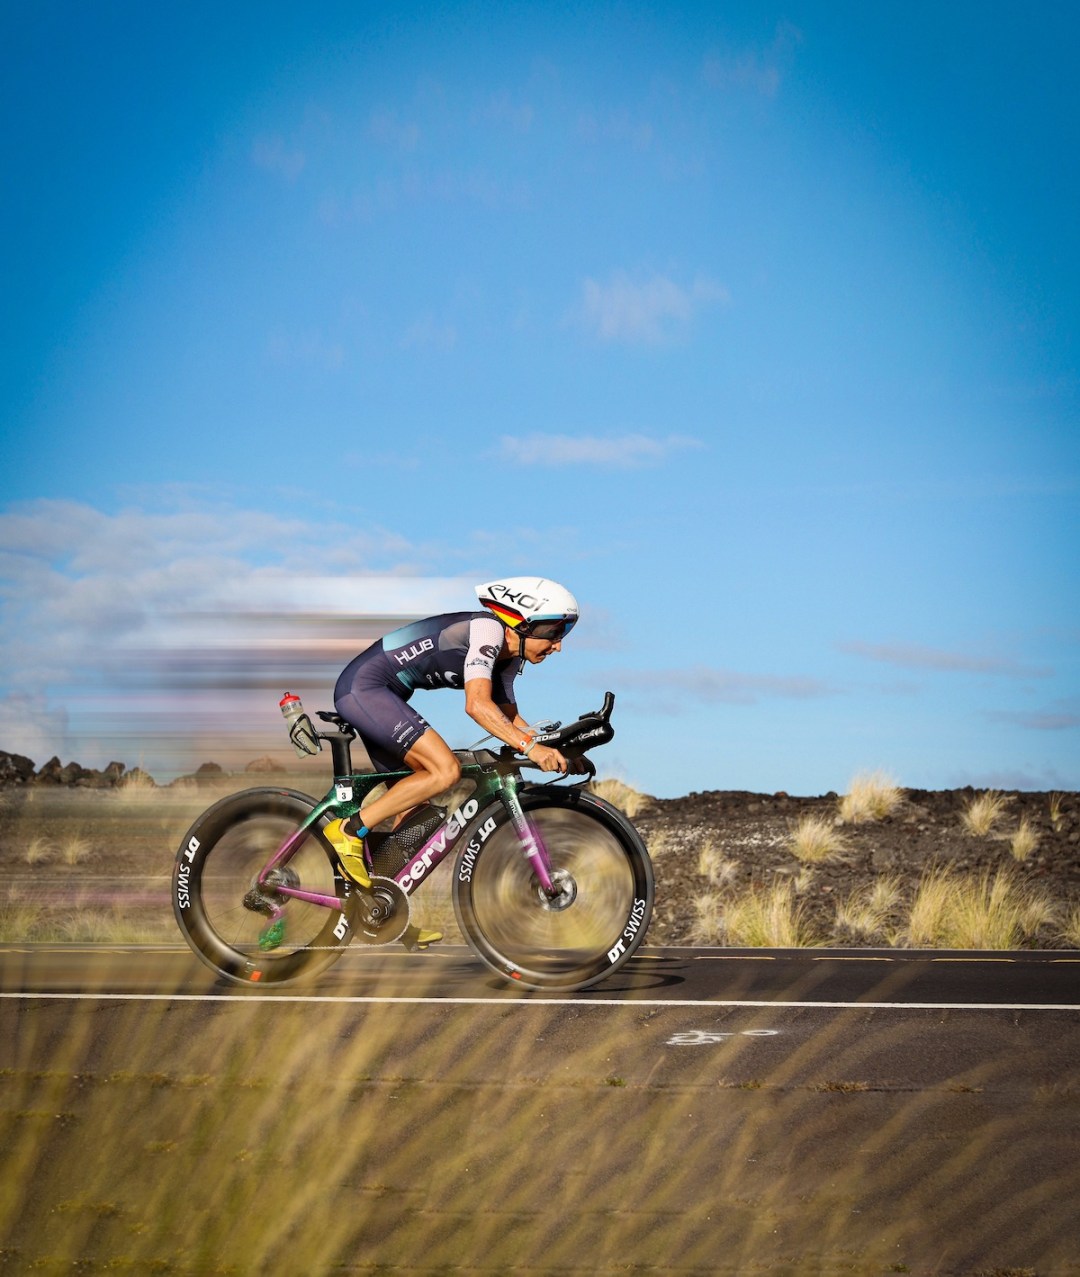 Anne Haug competes on the bike during the 2022 Ironman World Championship in Kailua Kona, Hawaii.